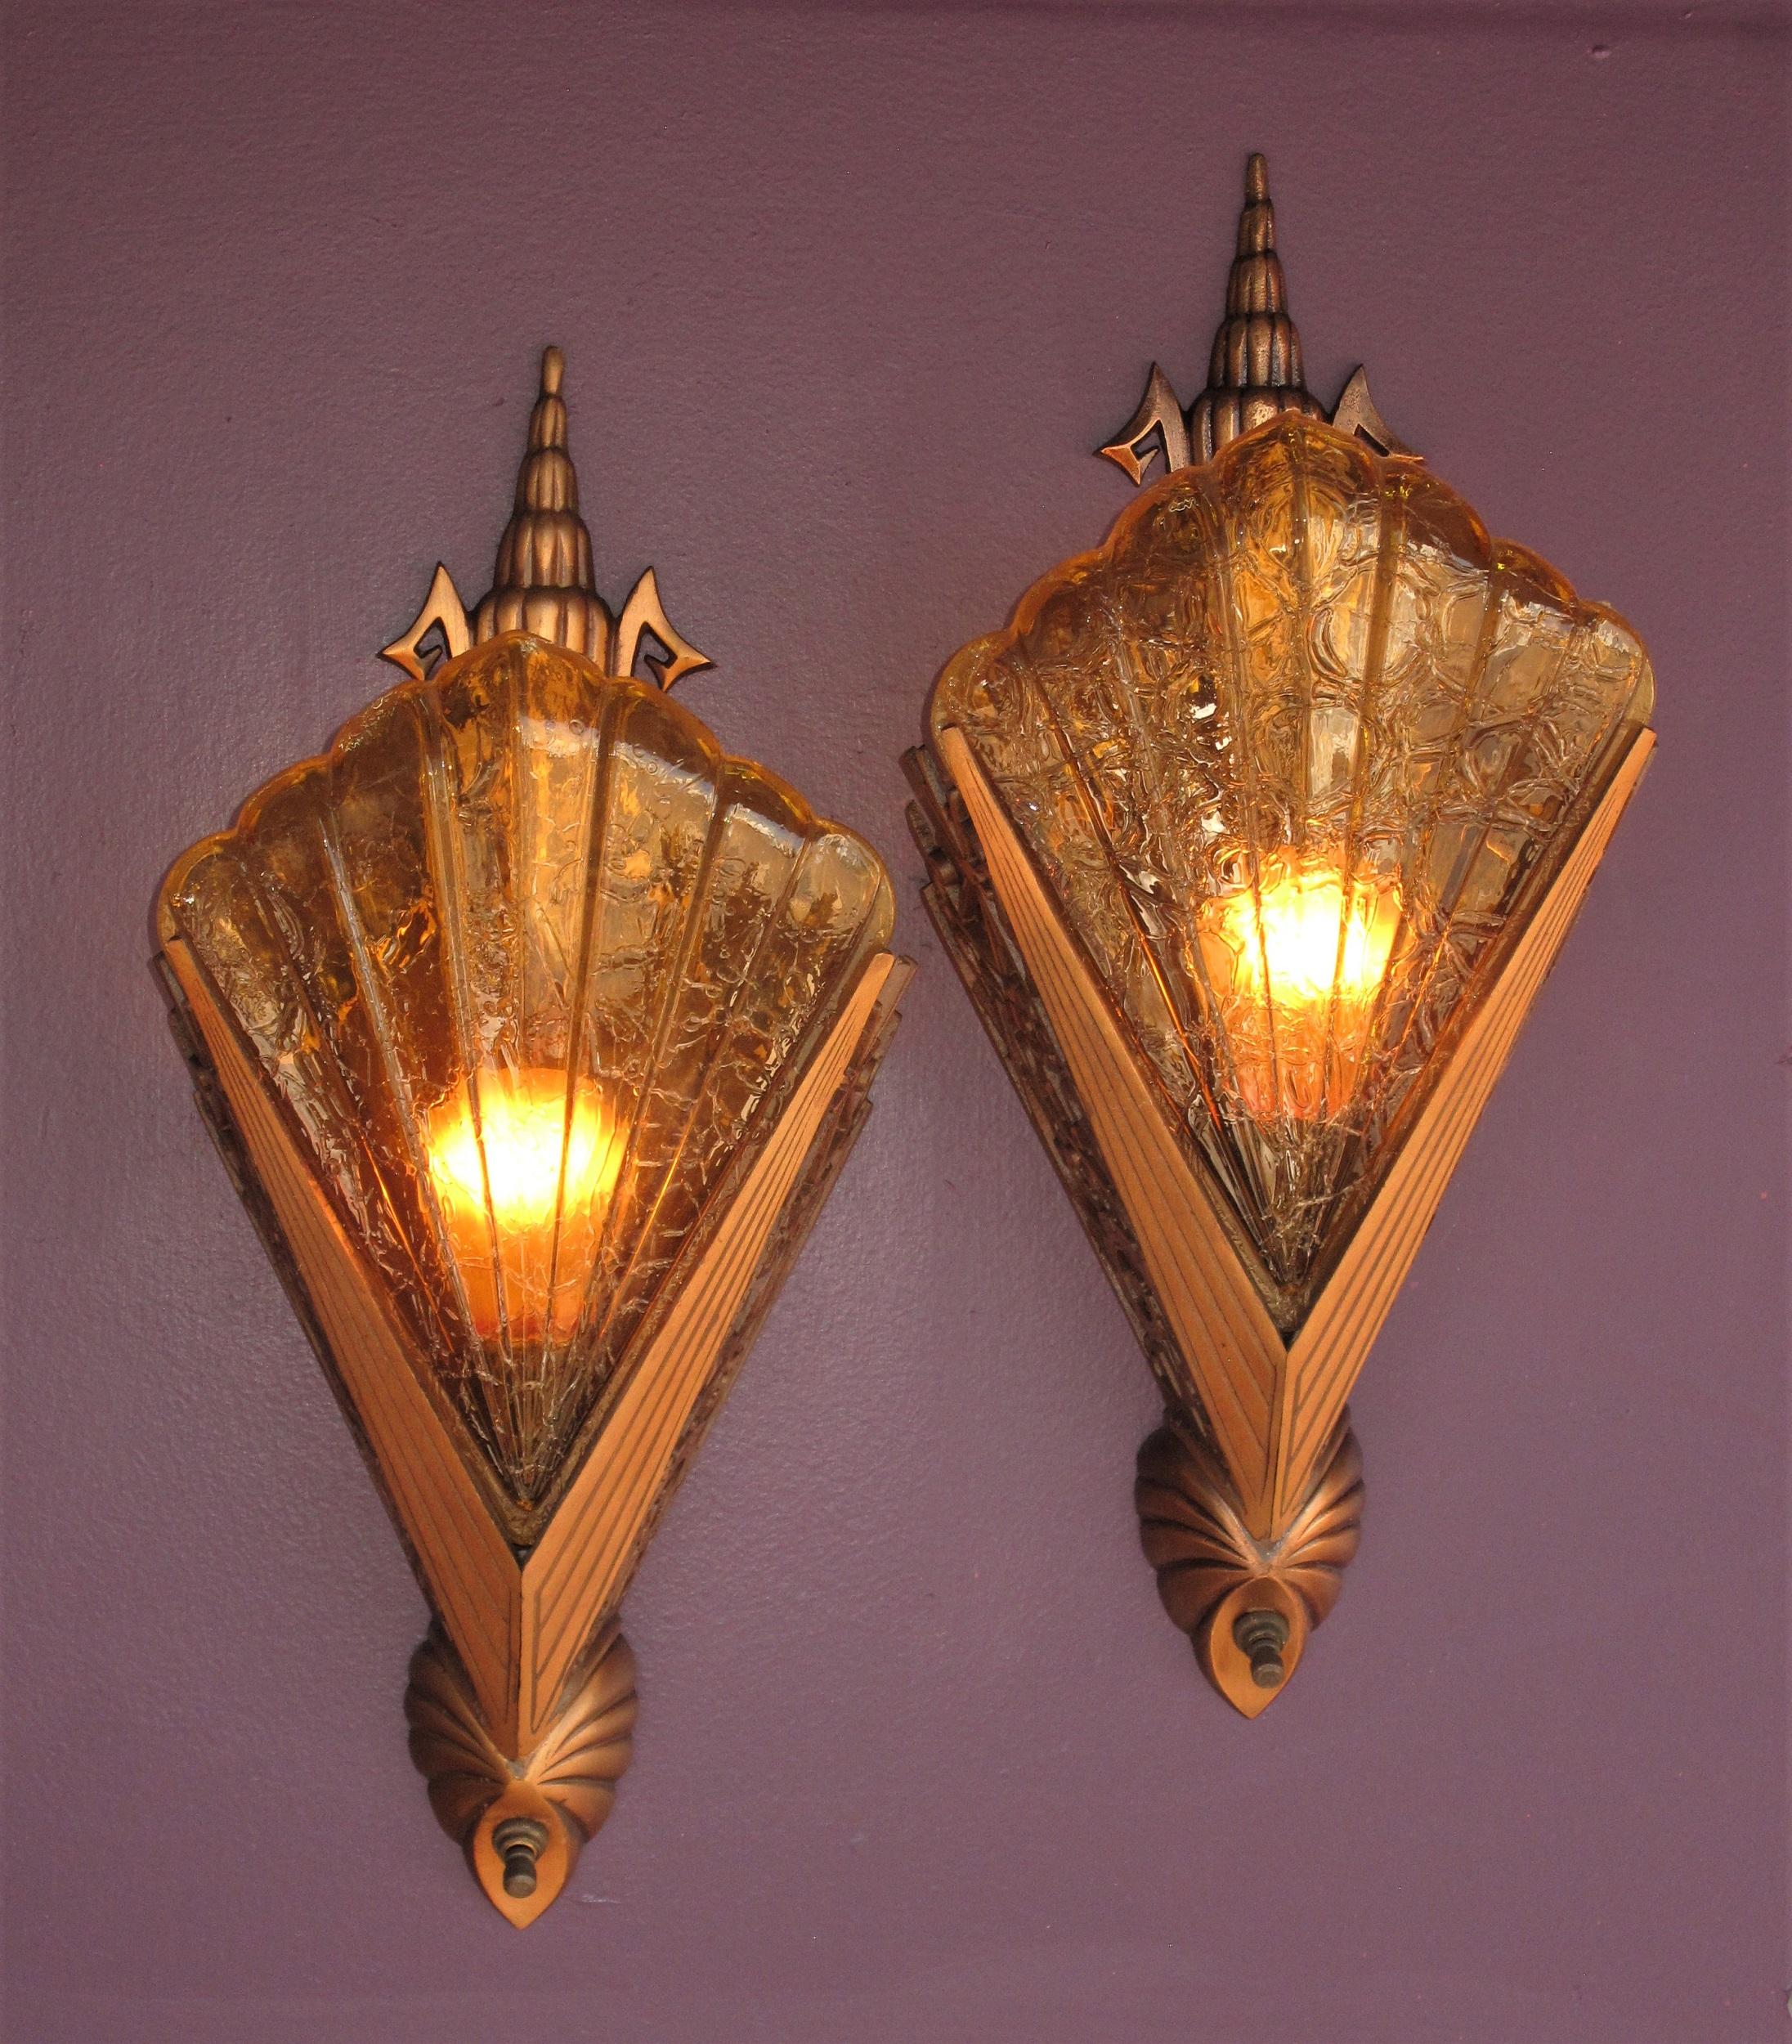 American Ultra Deco 30s Pr Bronze Slip Shade Sconces w/ Honey colored shades priced pair For Sale